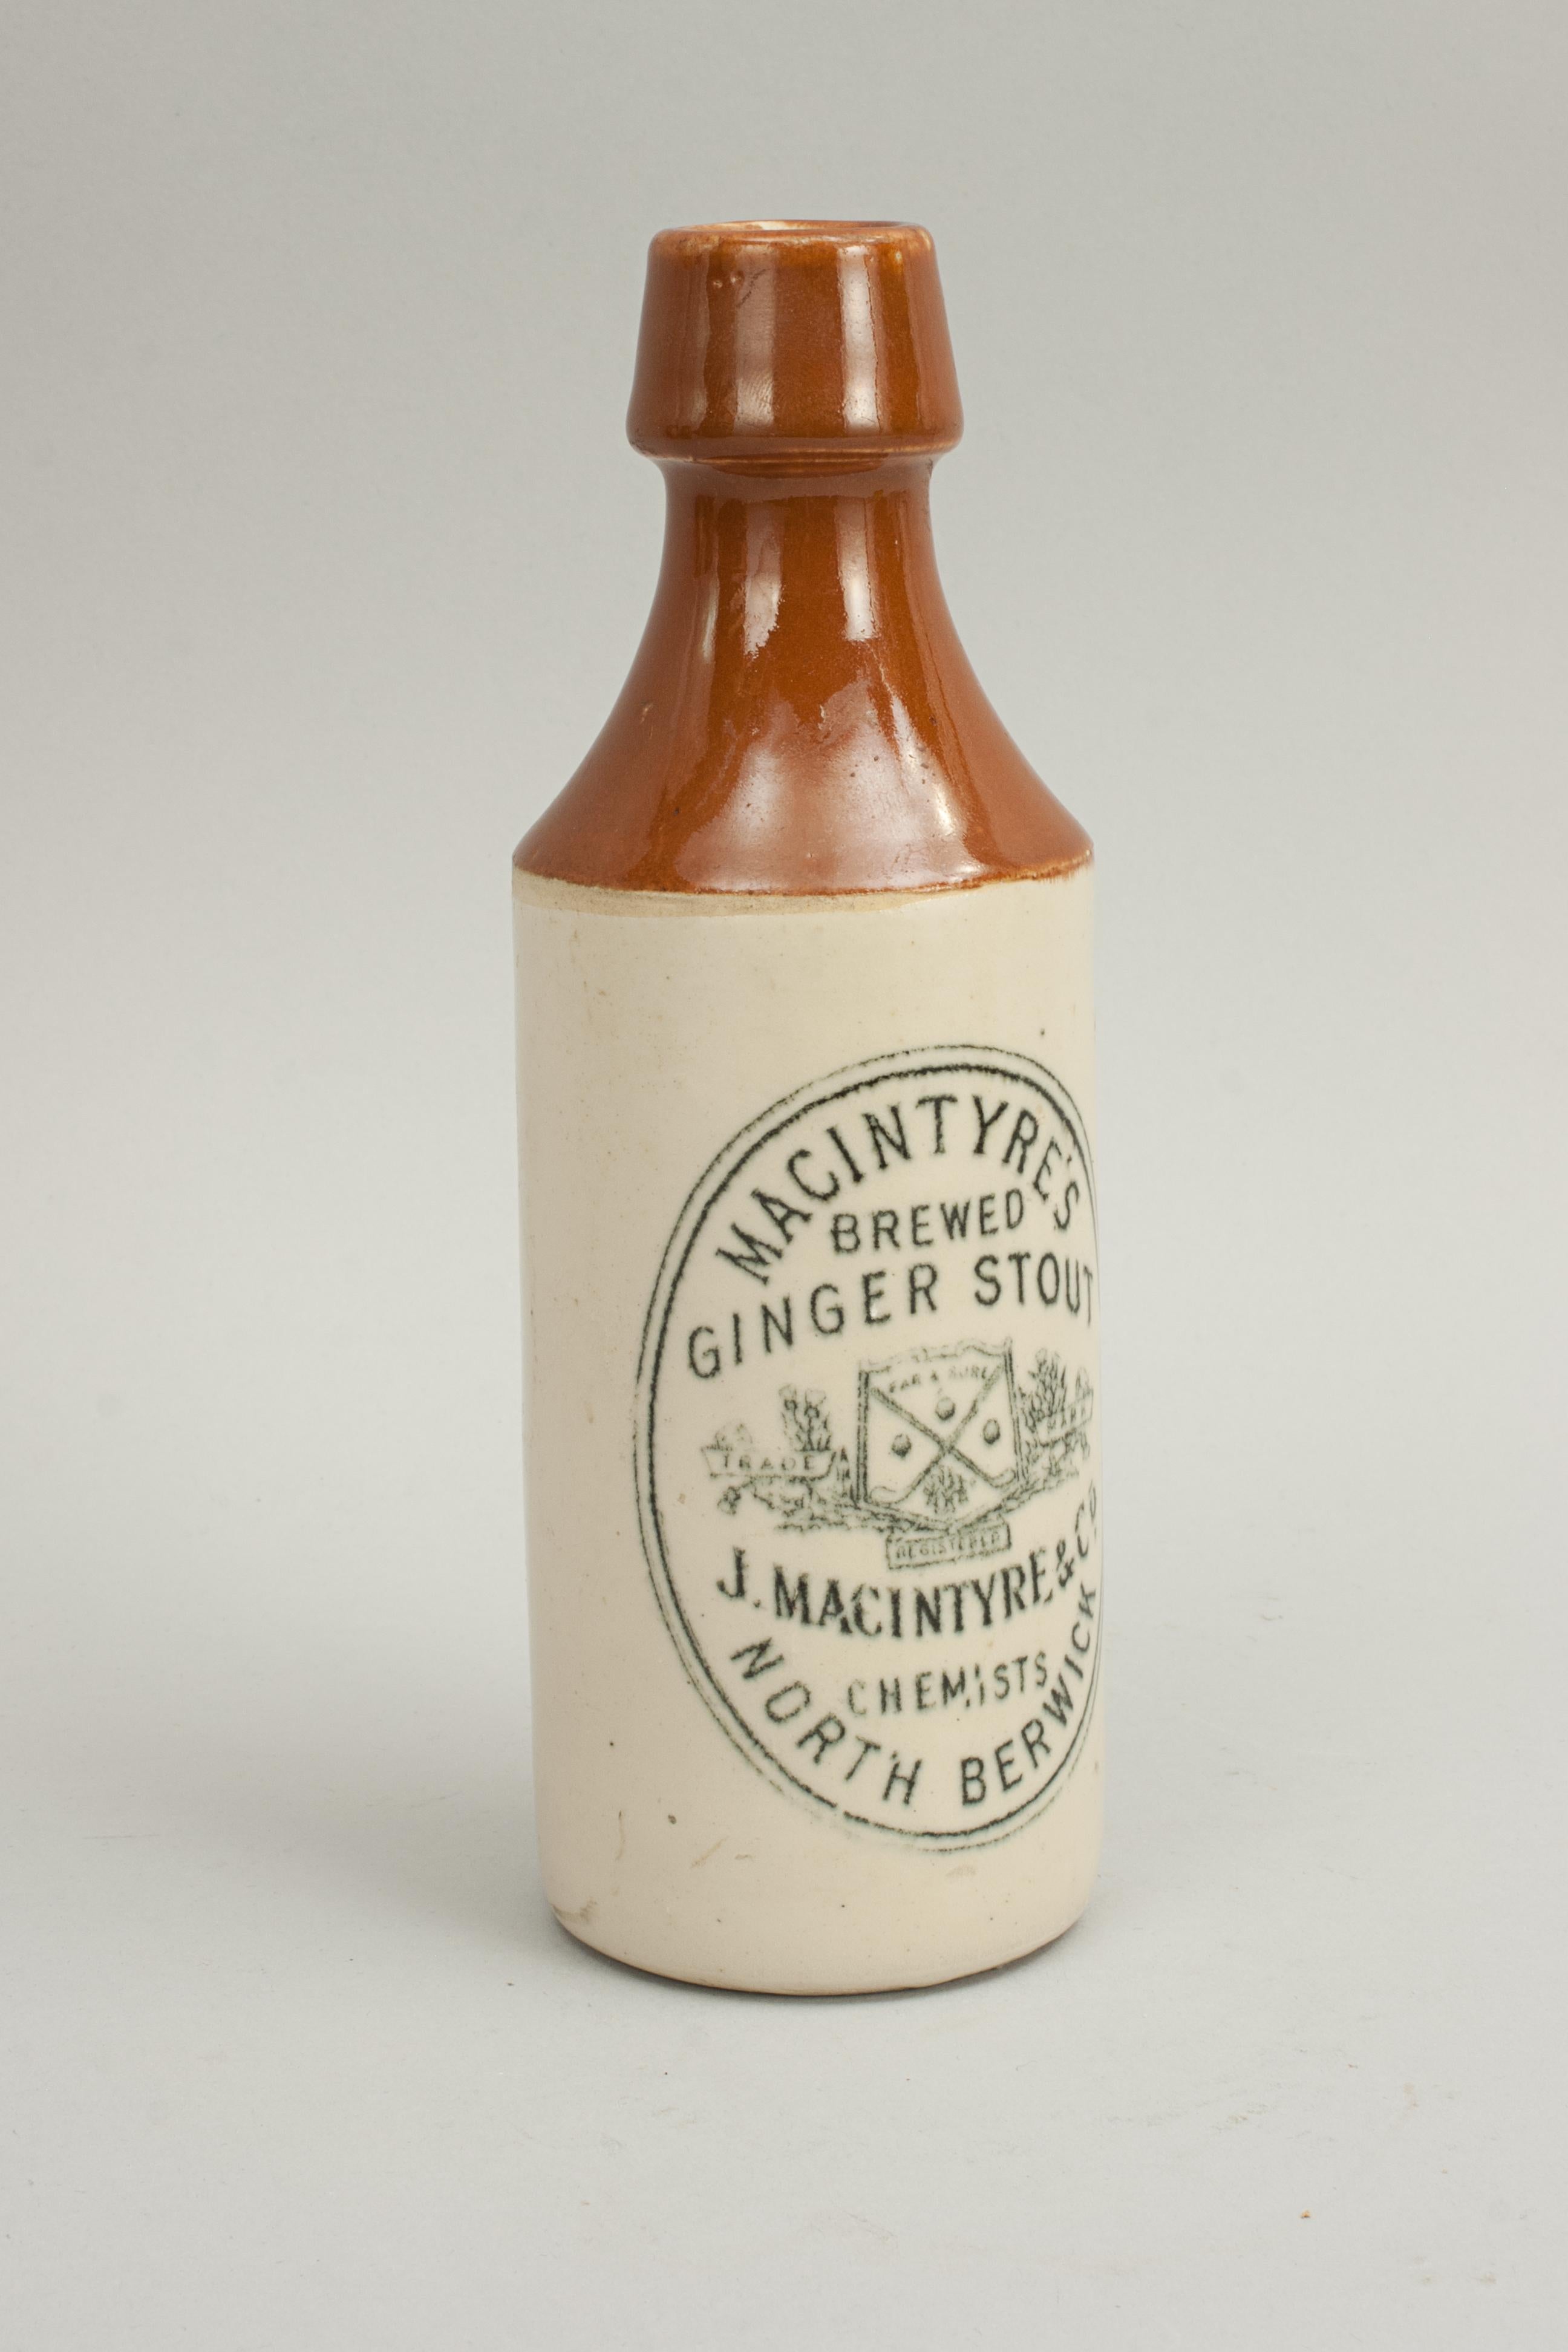 J. Macintyre & Co. Ginger Stout beer bottle.
A good example of a J. McIntyre & Co. of North Berwick Ginger Beer glazed stone ware bottle. The front of the bottle decorated 'Macintyre's Brewed Ginger Stout, J. Macintyre & Co. Chemists, North